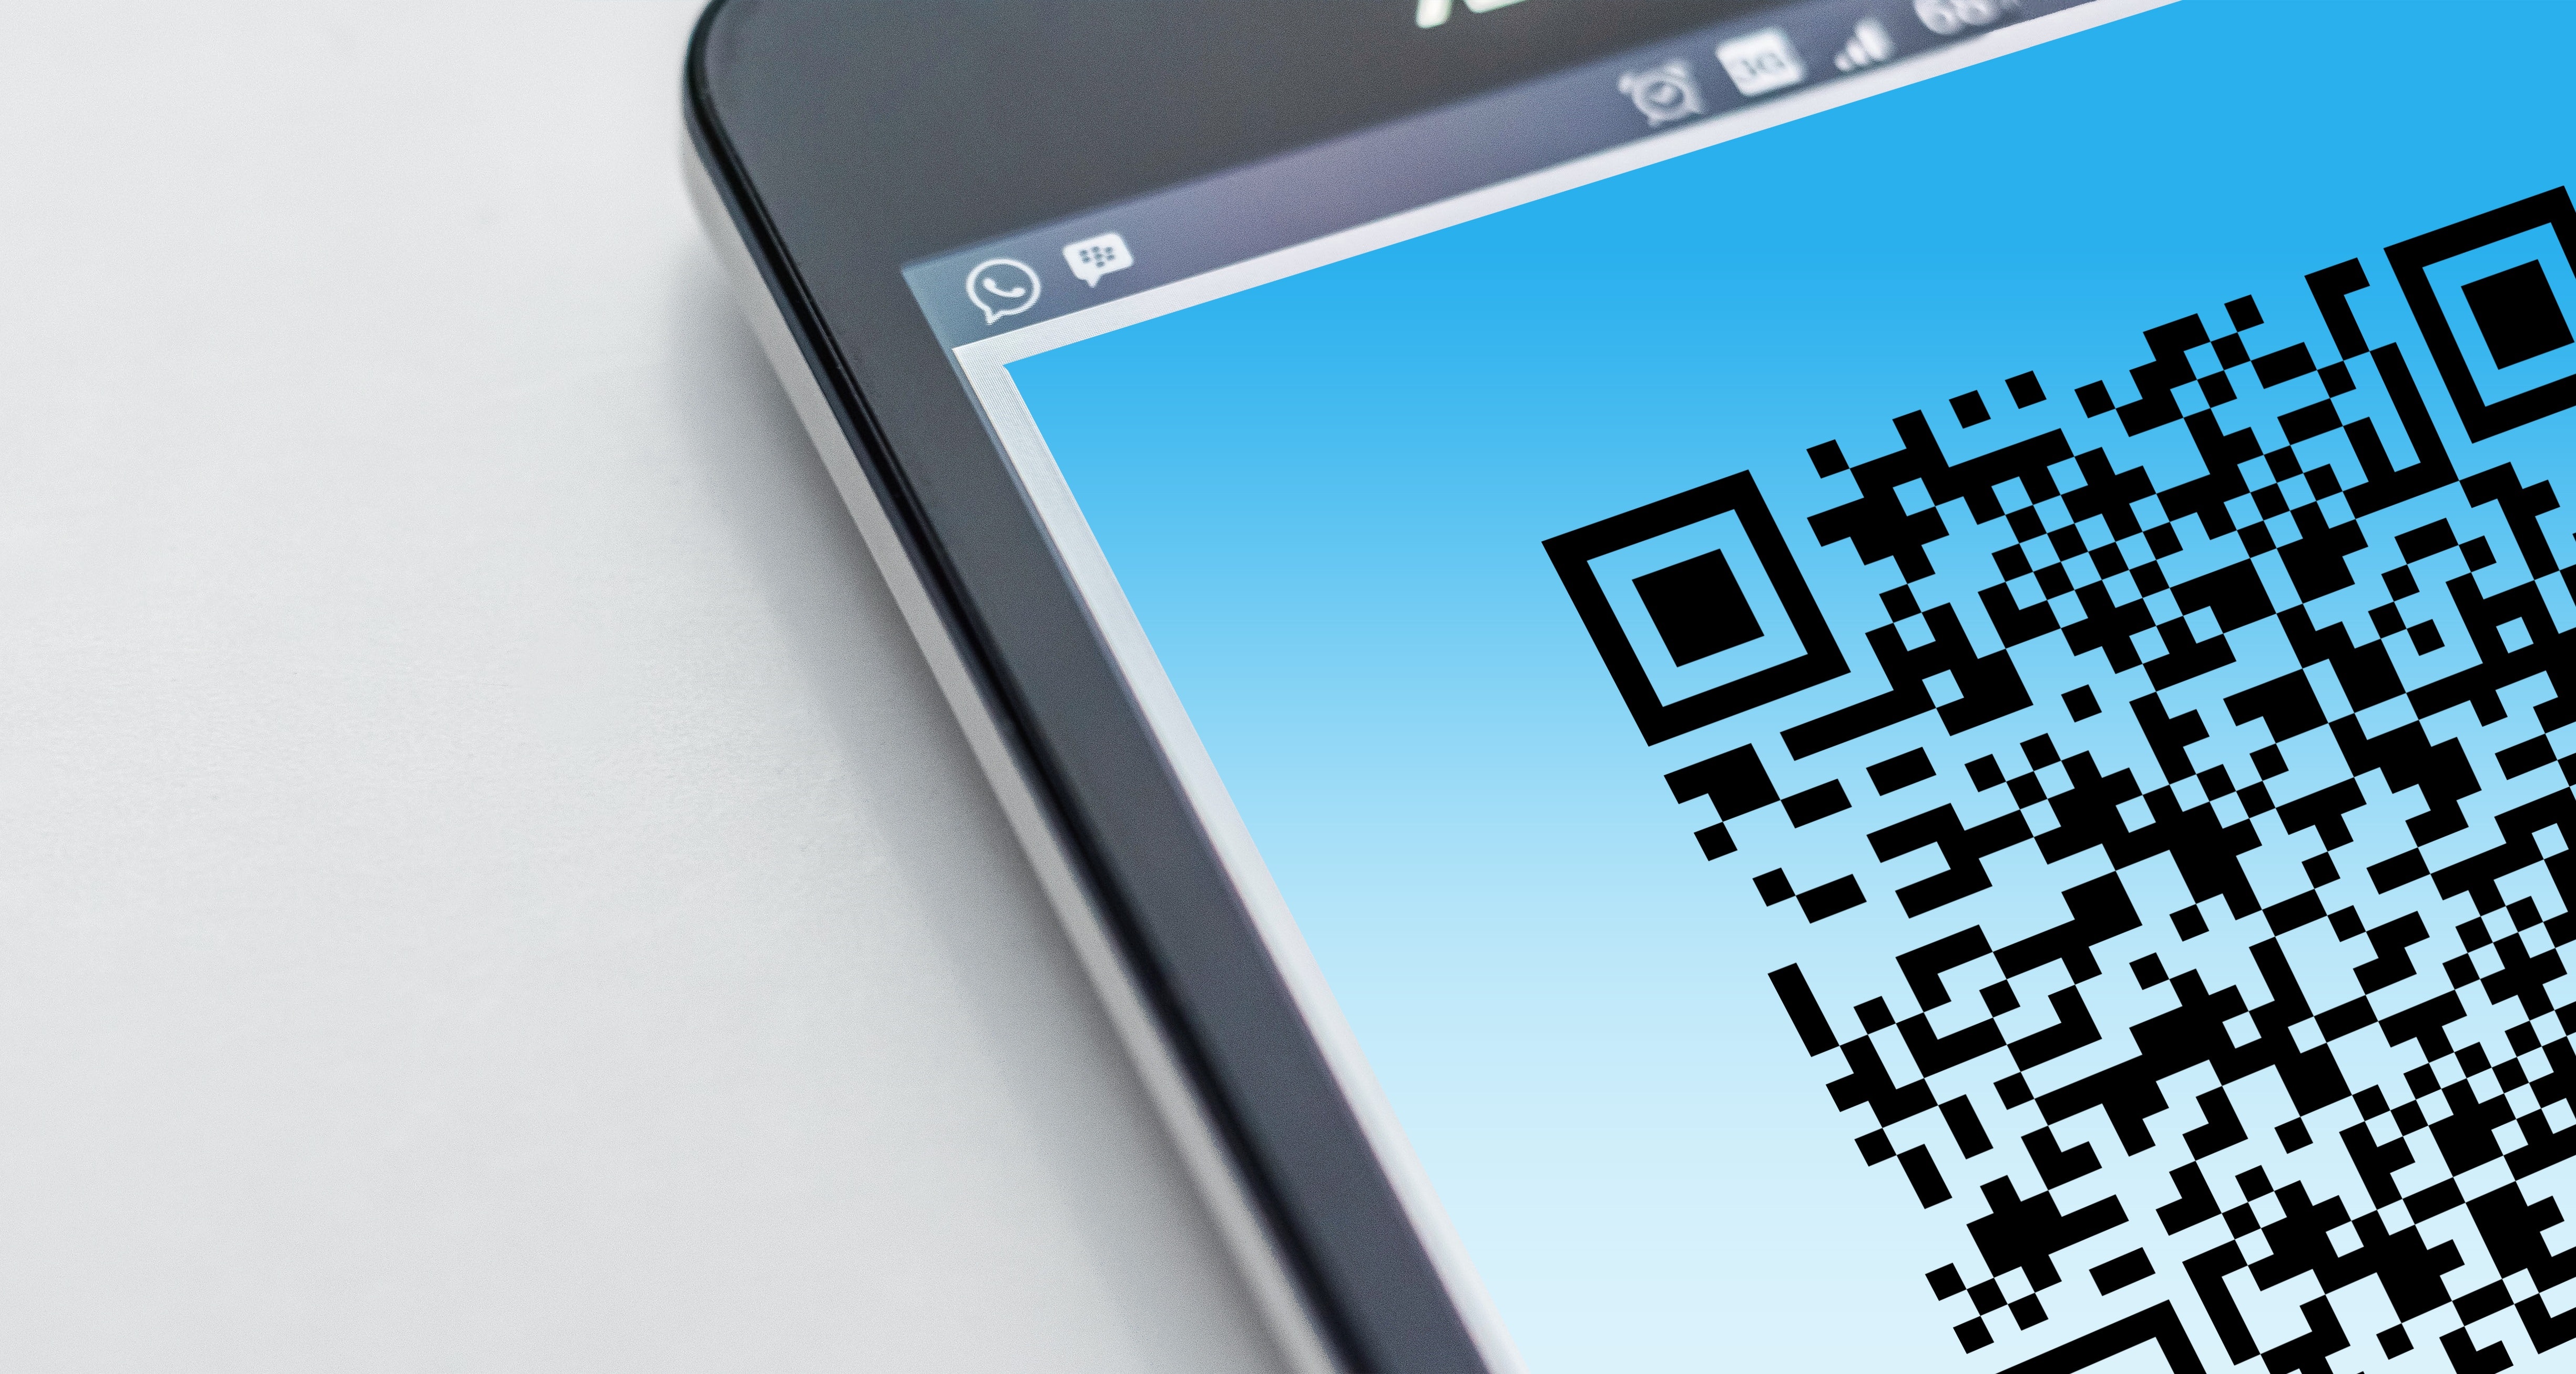 A QR code shows on a mobile screen